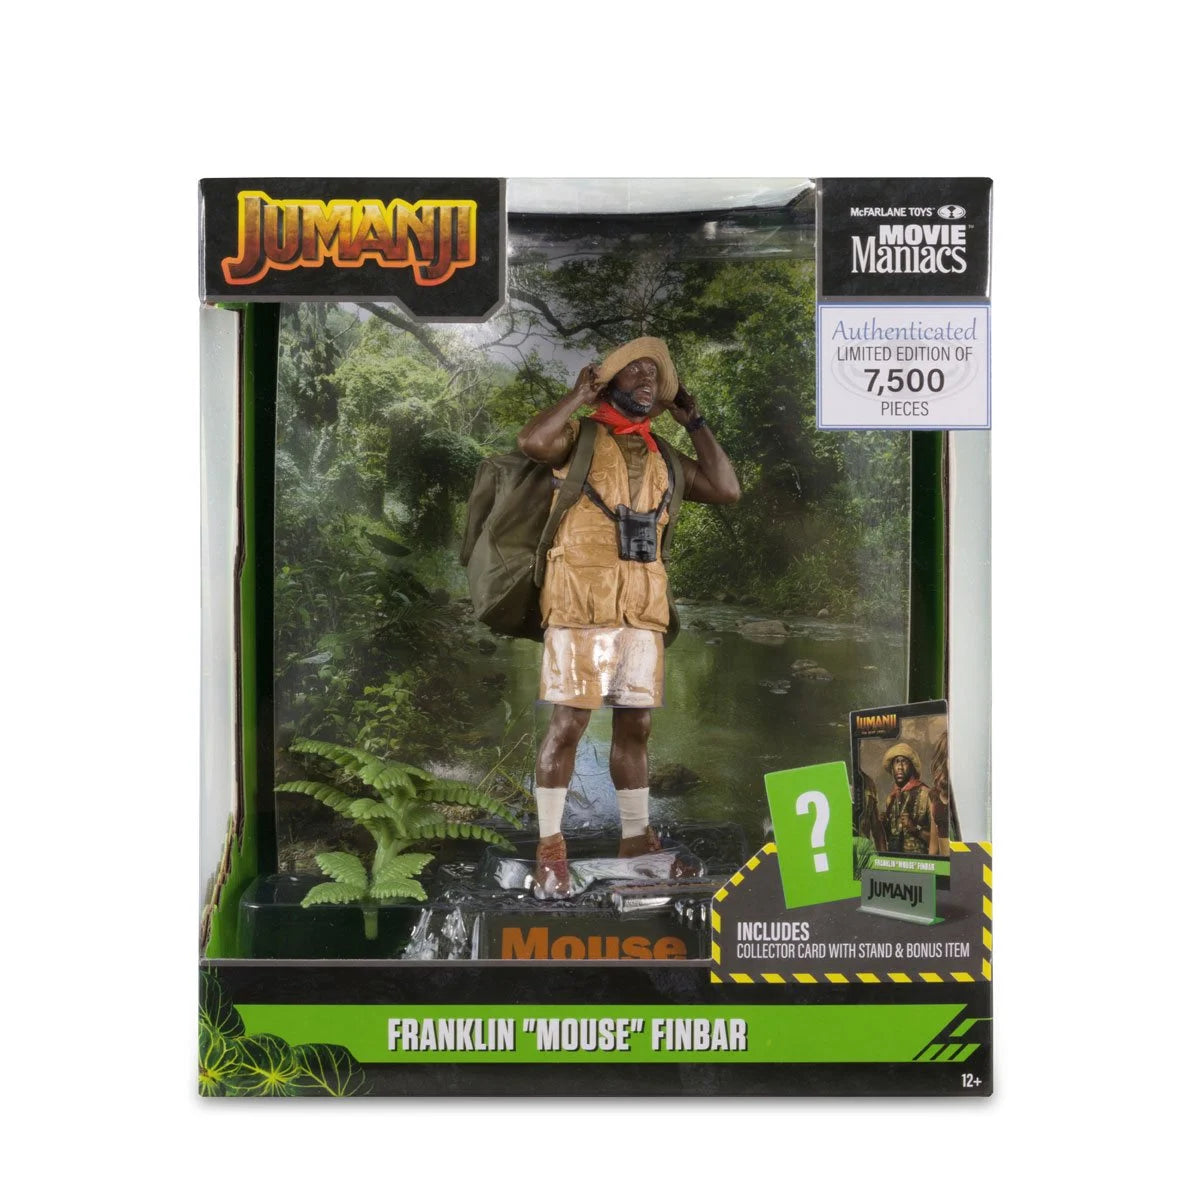 Movie Maniacs Wave 4 Jumanji Franklin "Mouse" Finbar Limited Edition 6-Inch Scale Posed Figure in a package - Heretoserveyou